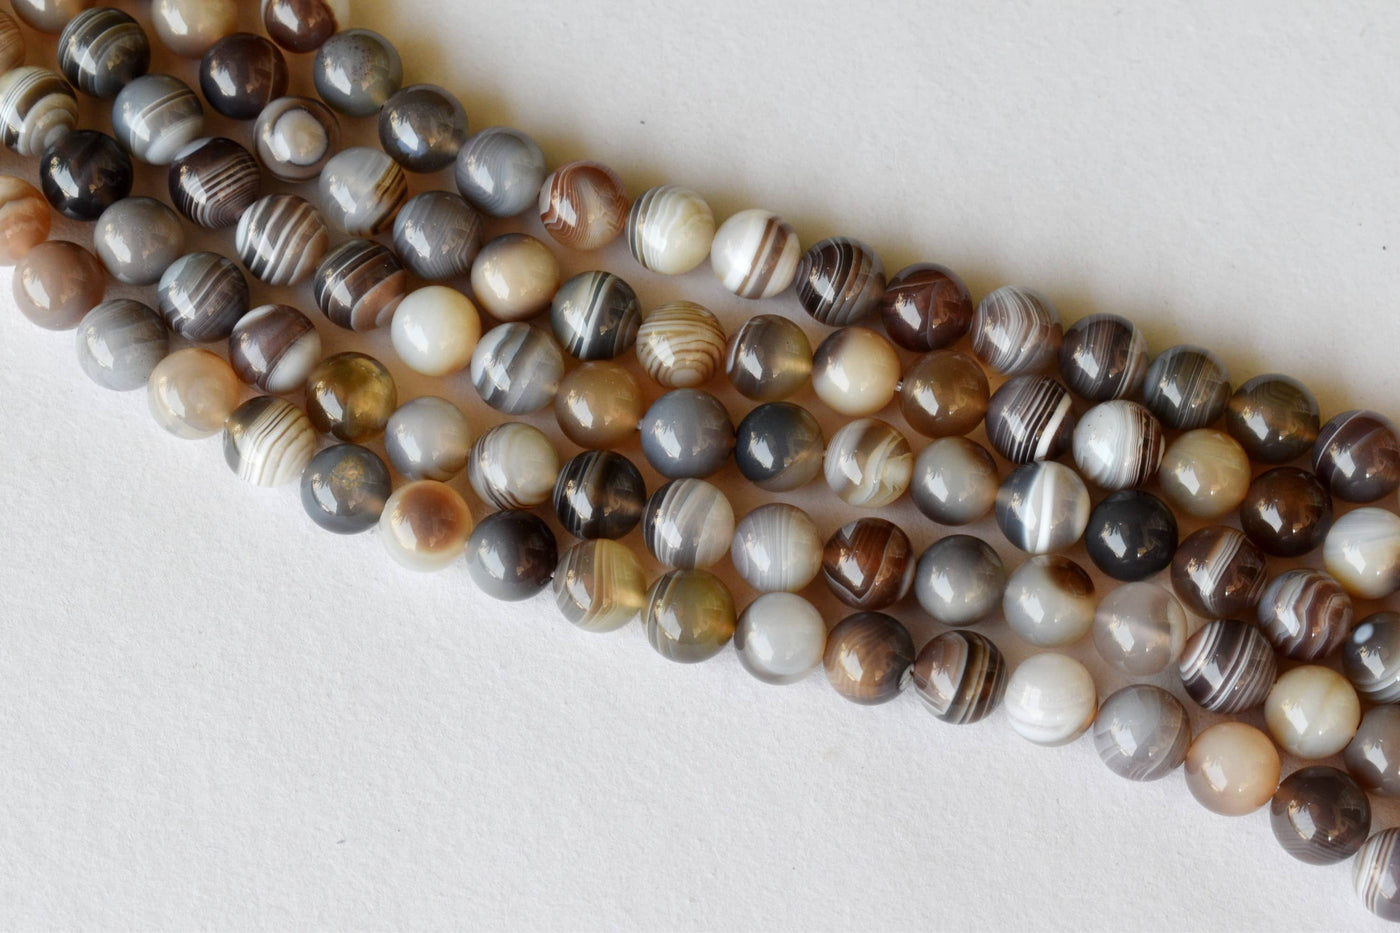 Botswana Agate Beads, Natural Round Crystal Beads 6mm to 12mm